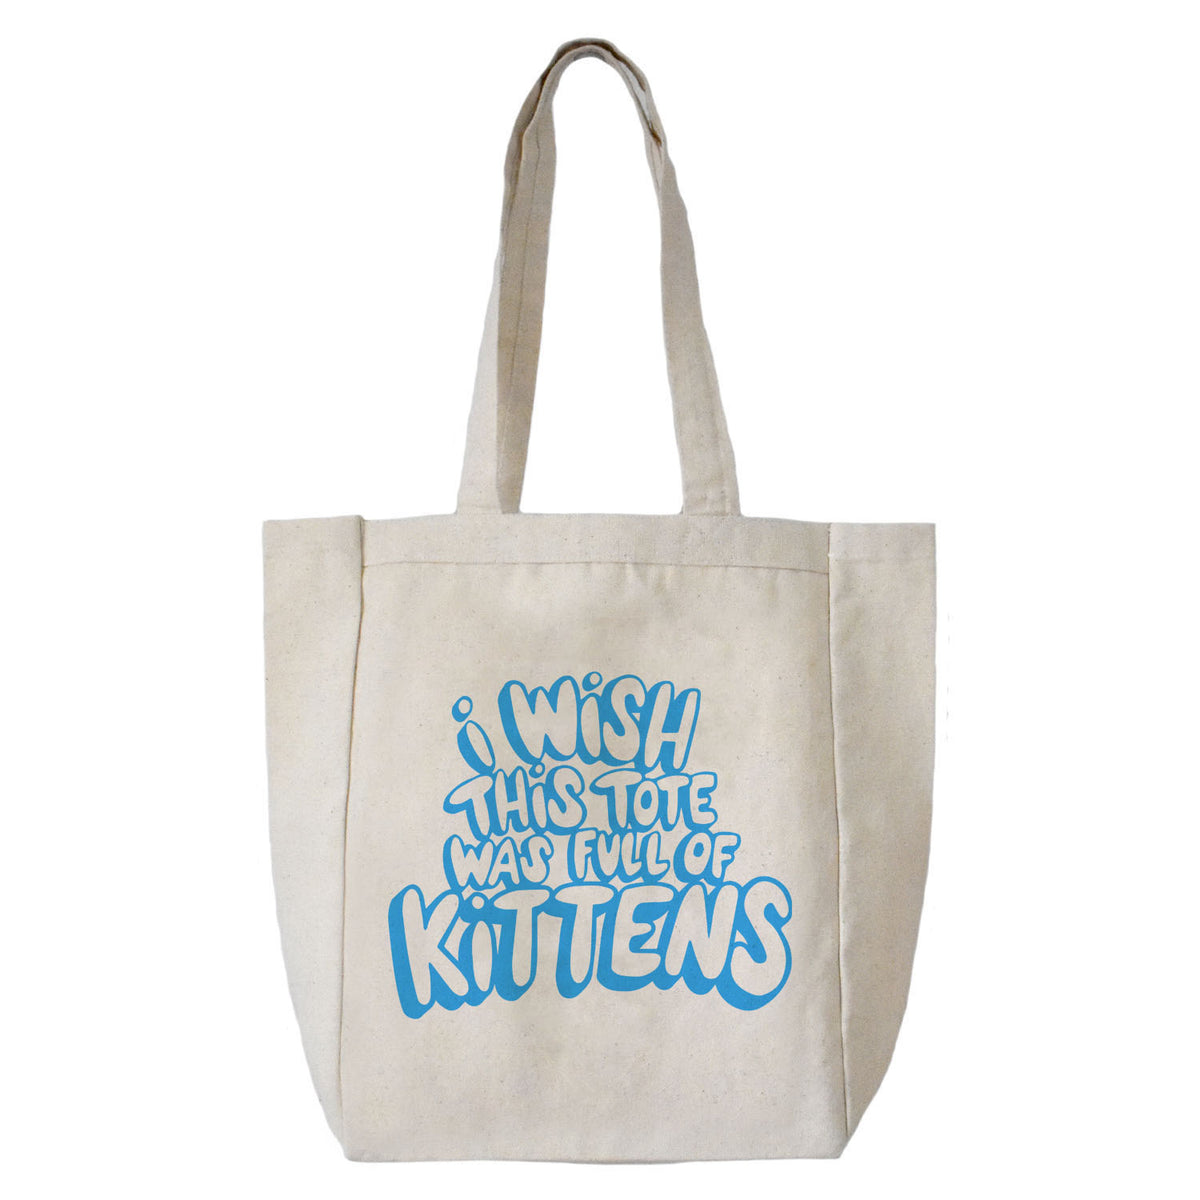 I Wish This Tote Was Full of Kittens Canvas Tote – Frog & Toad Press